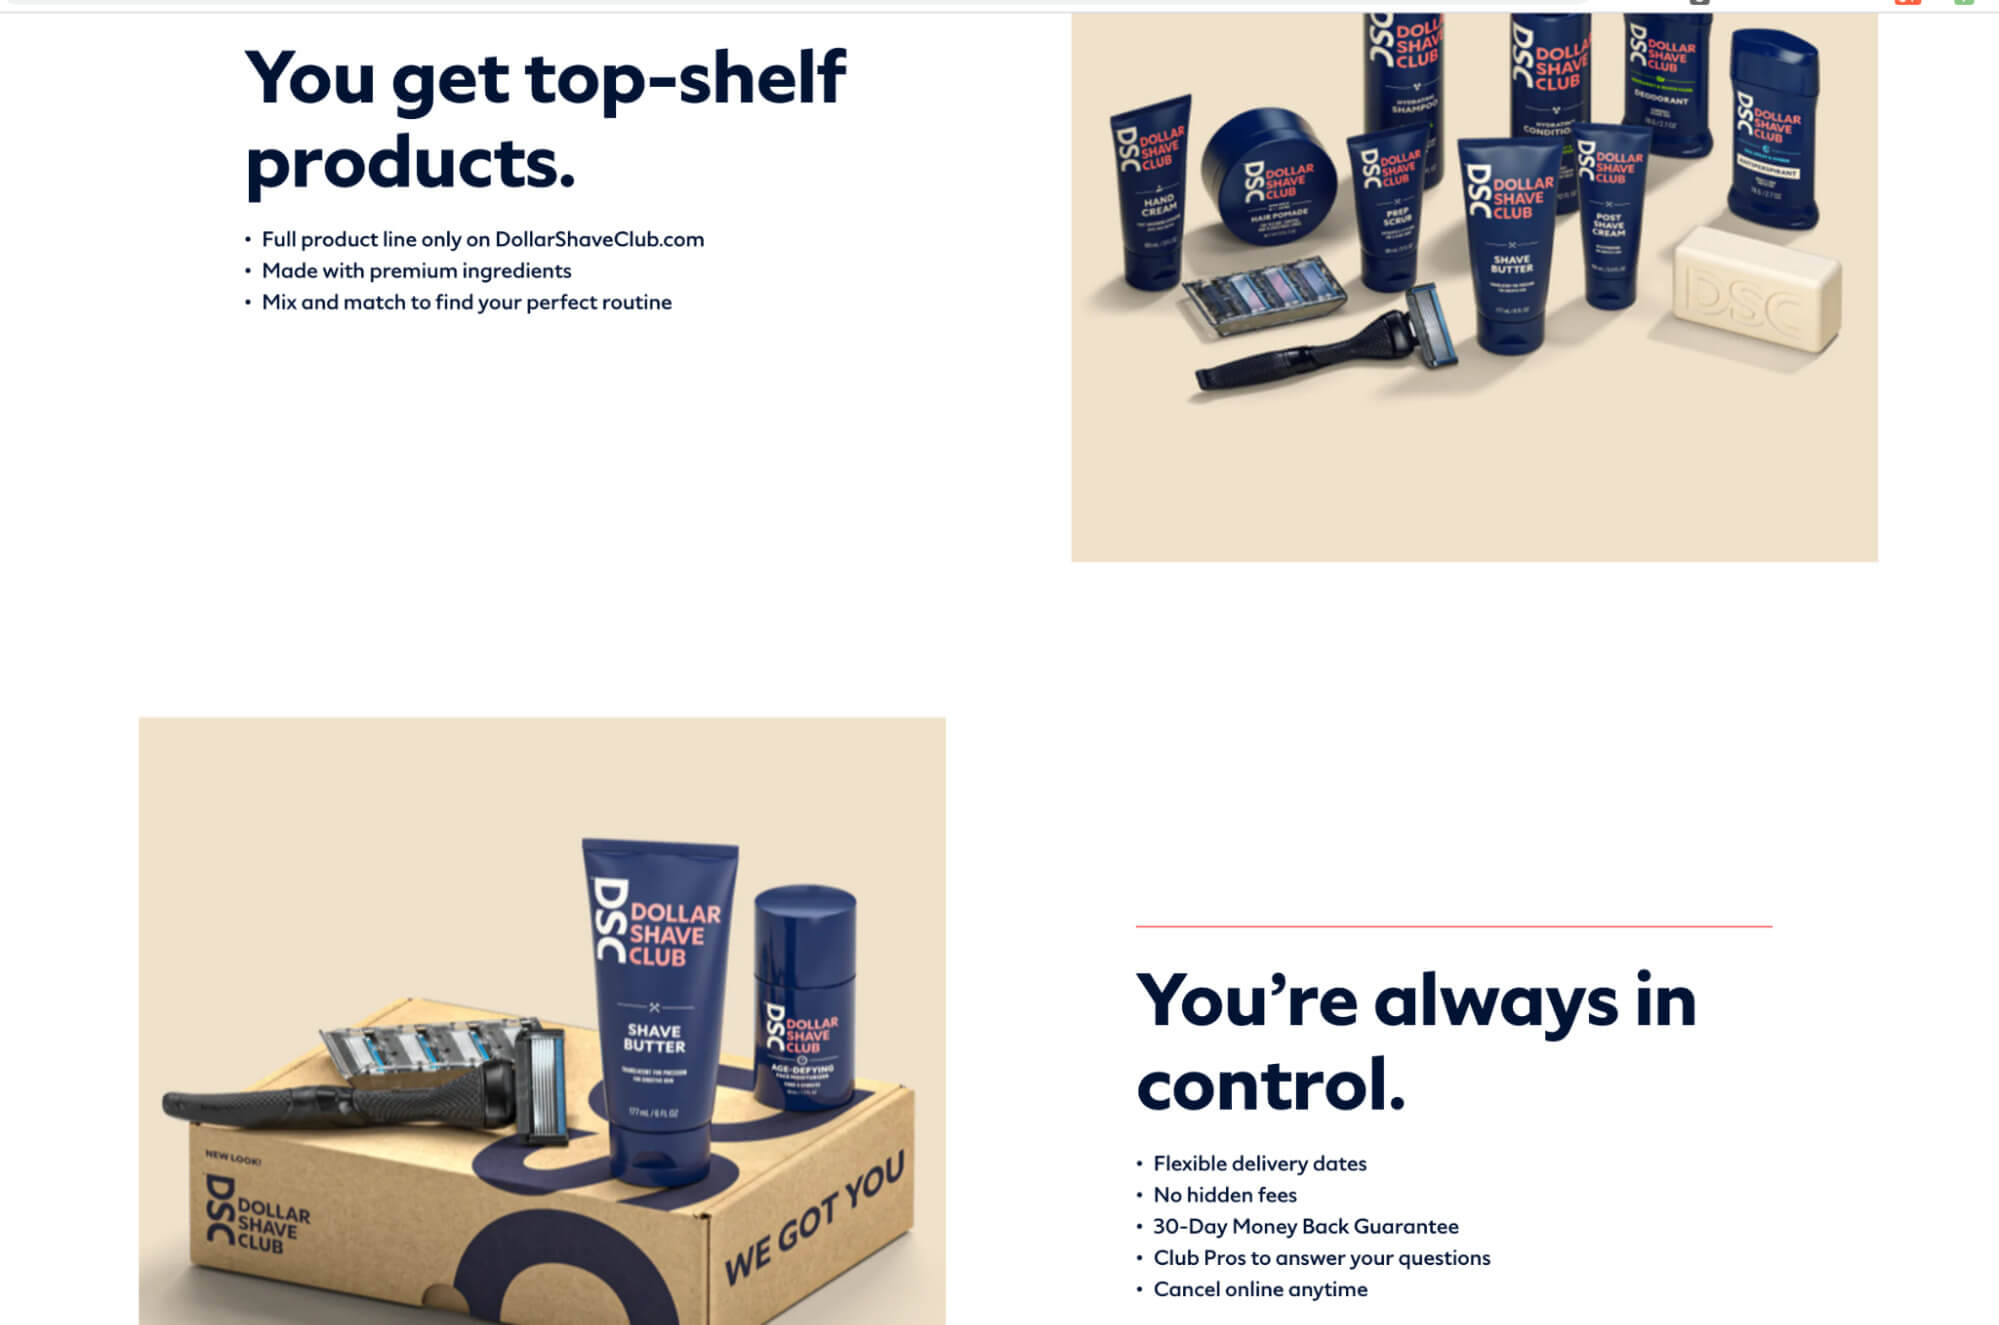 Dollar Shave Clubs product messaging